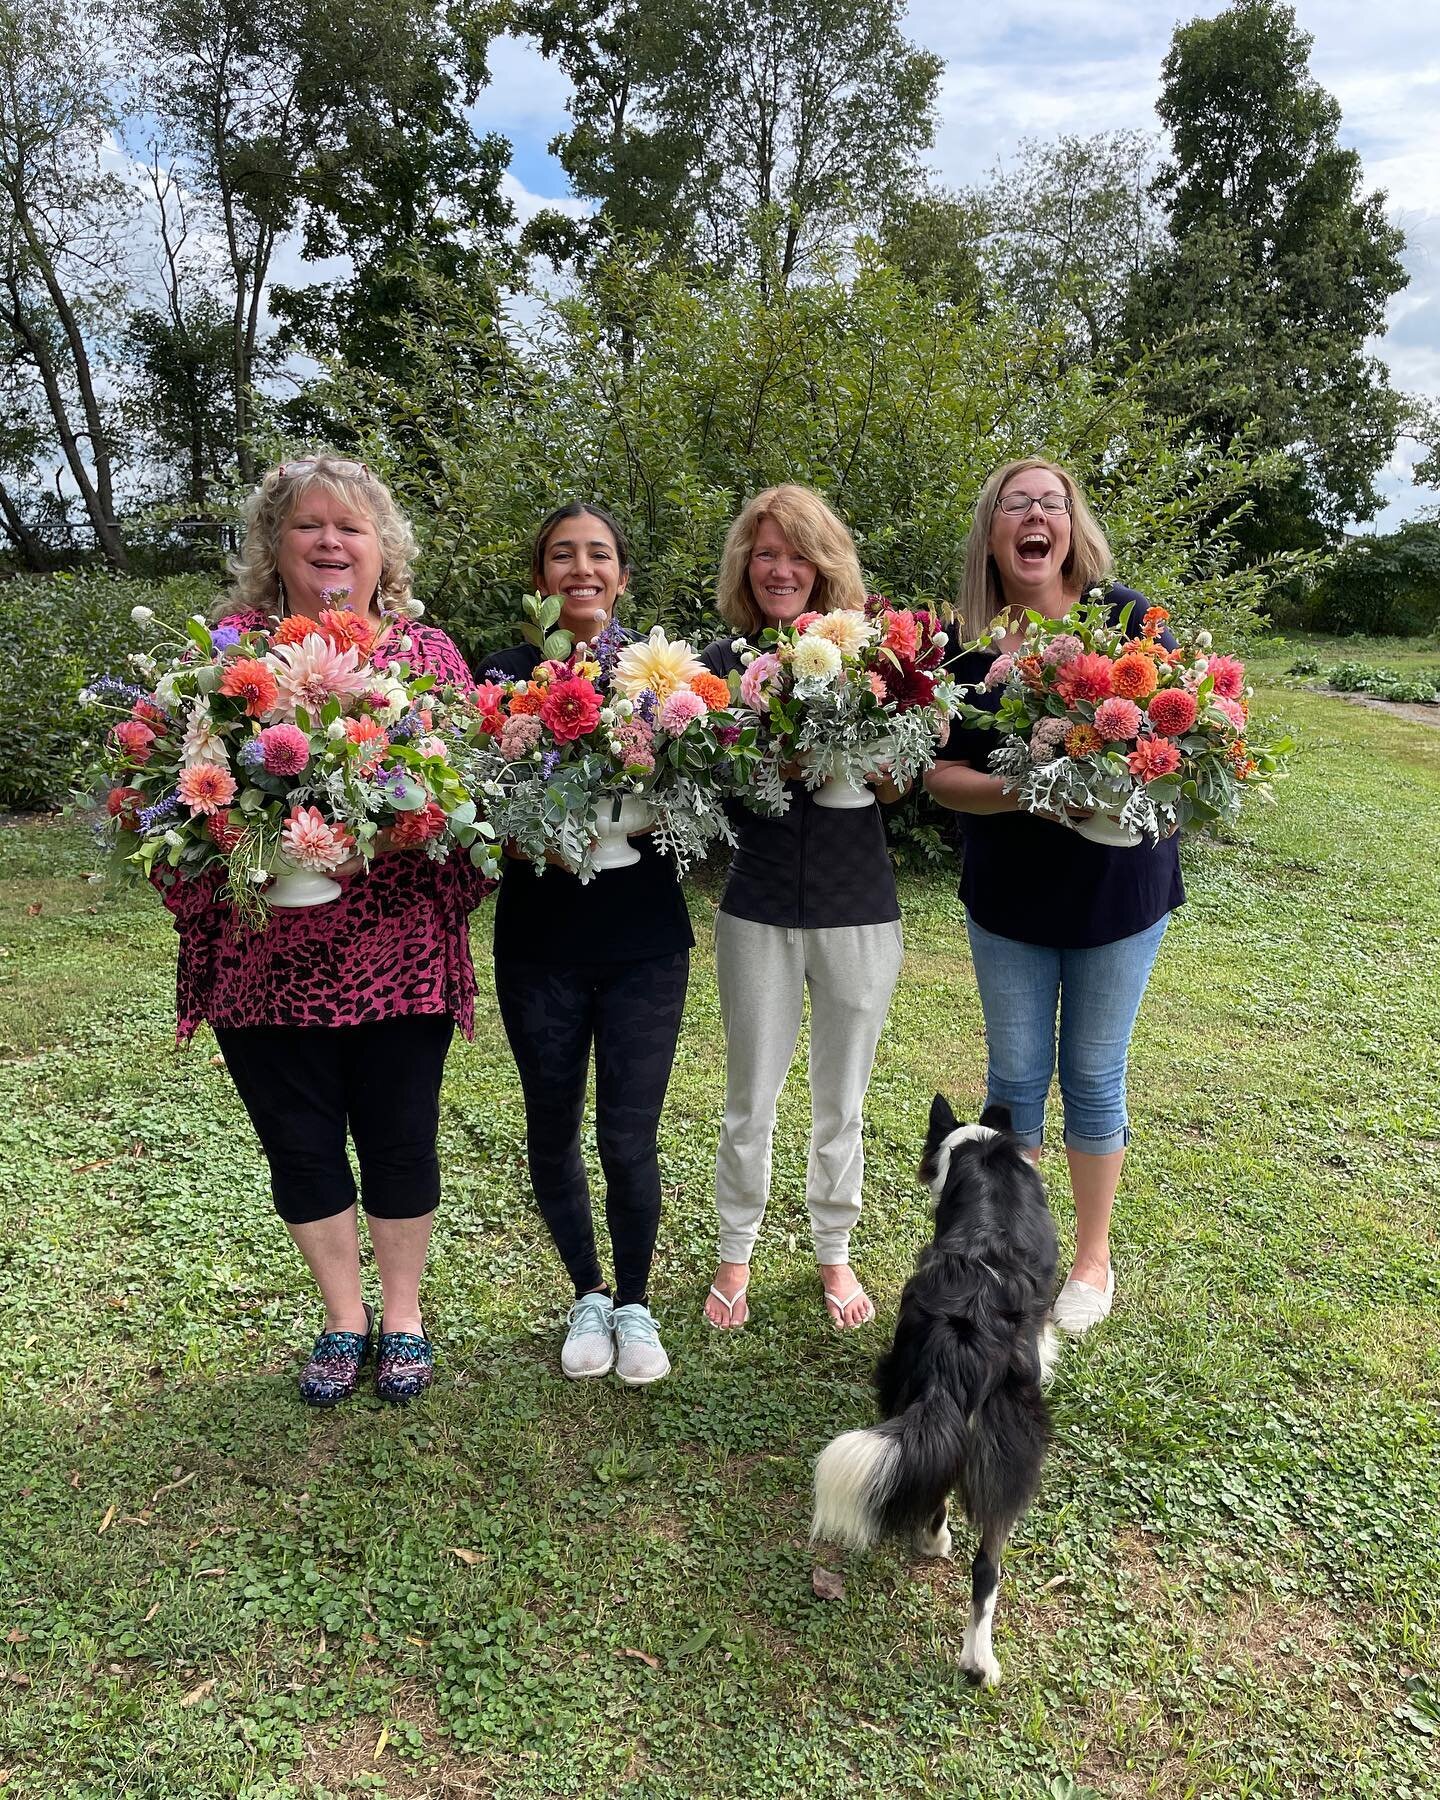 Give the gift of a class at our farm for Mother&rsquo;s Day! It&rsquo;s a special experience to share with a loved one.

🌼Focus on Peonies - June 3rd

🌼Cut Your Own Summer Series- July 26th, August 30th, or September 27th

🌼Focus on Lisianthus - A